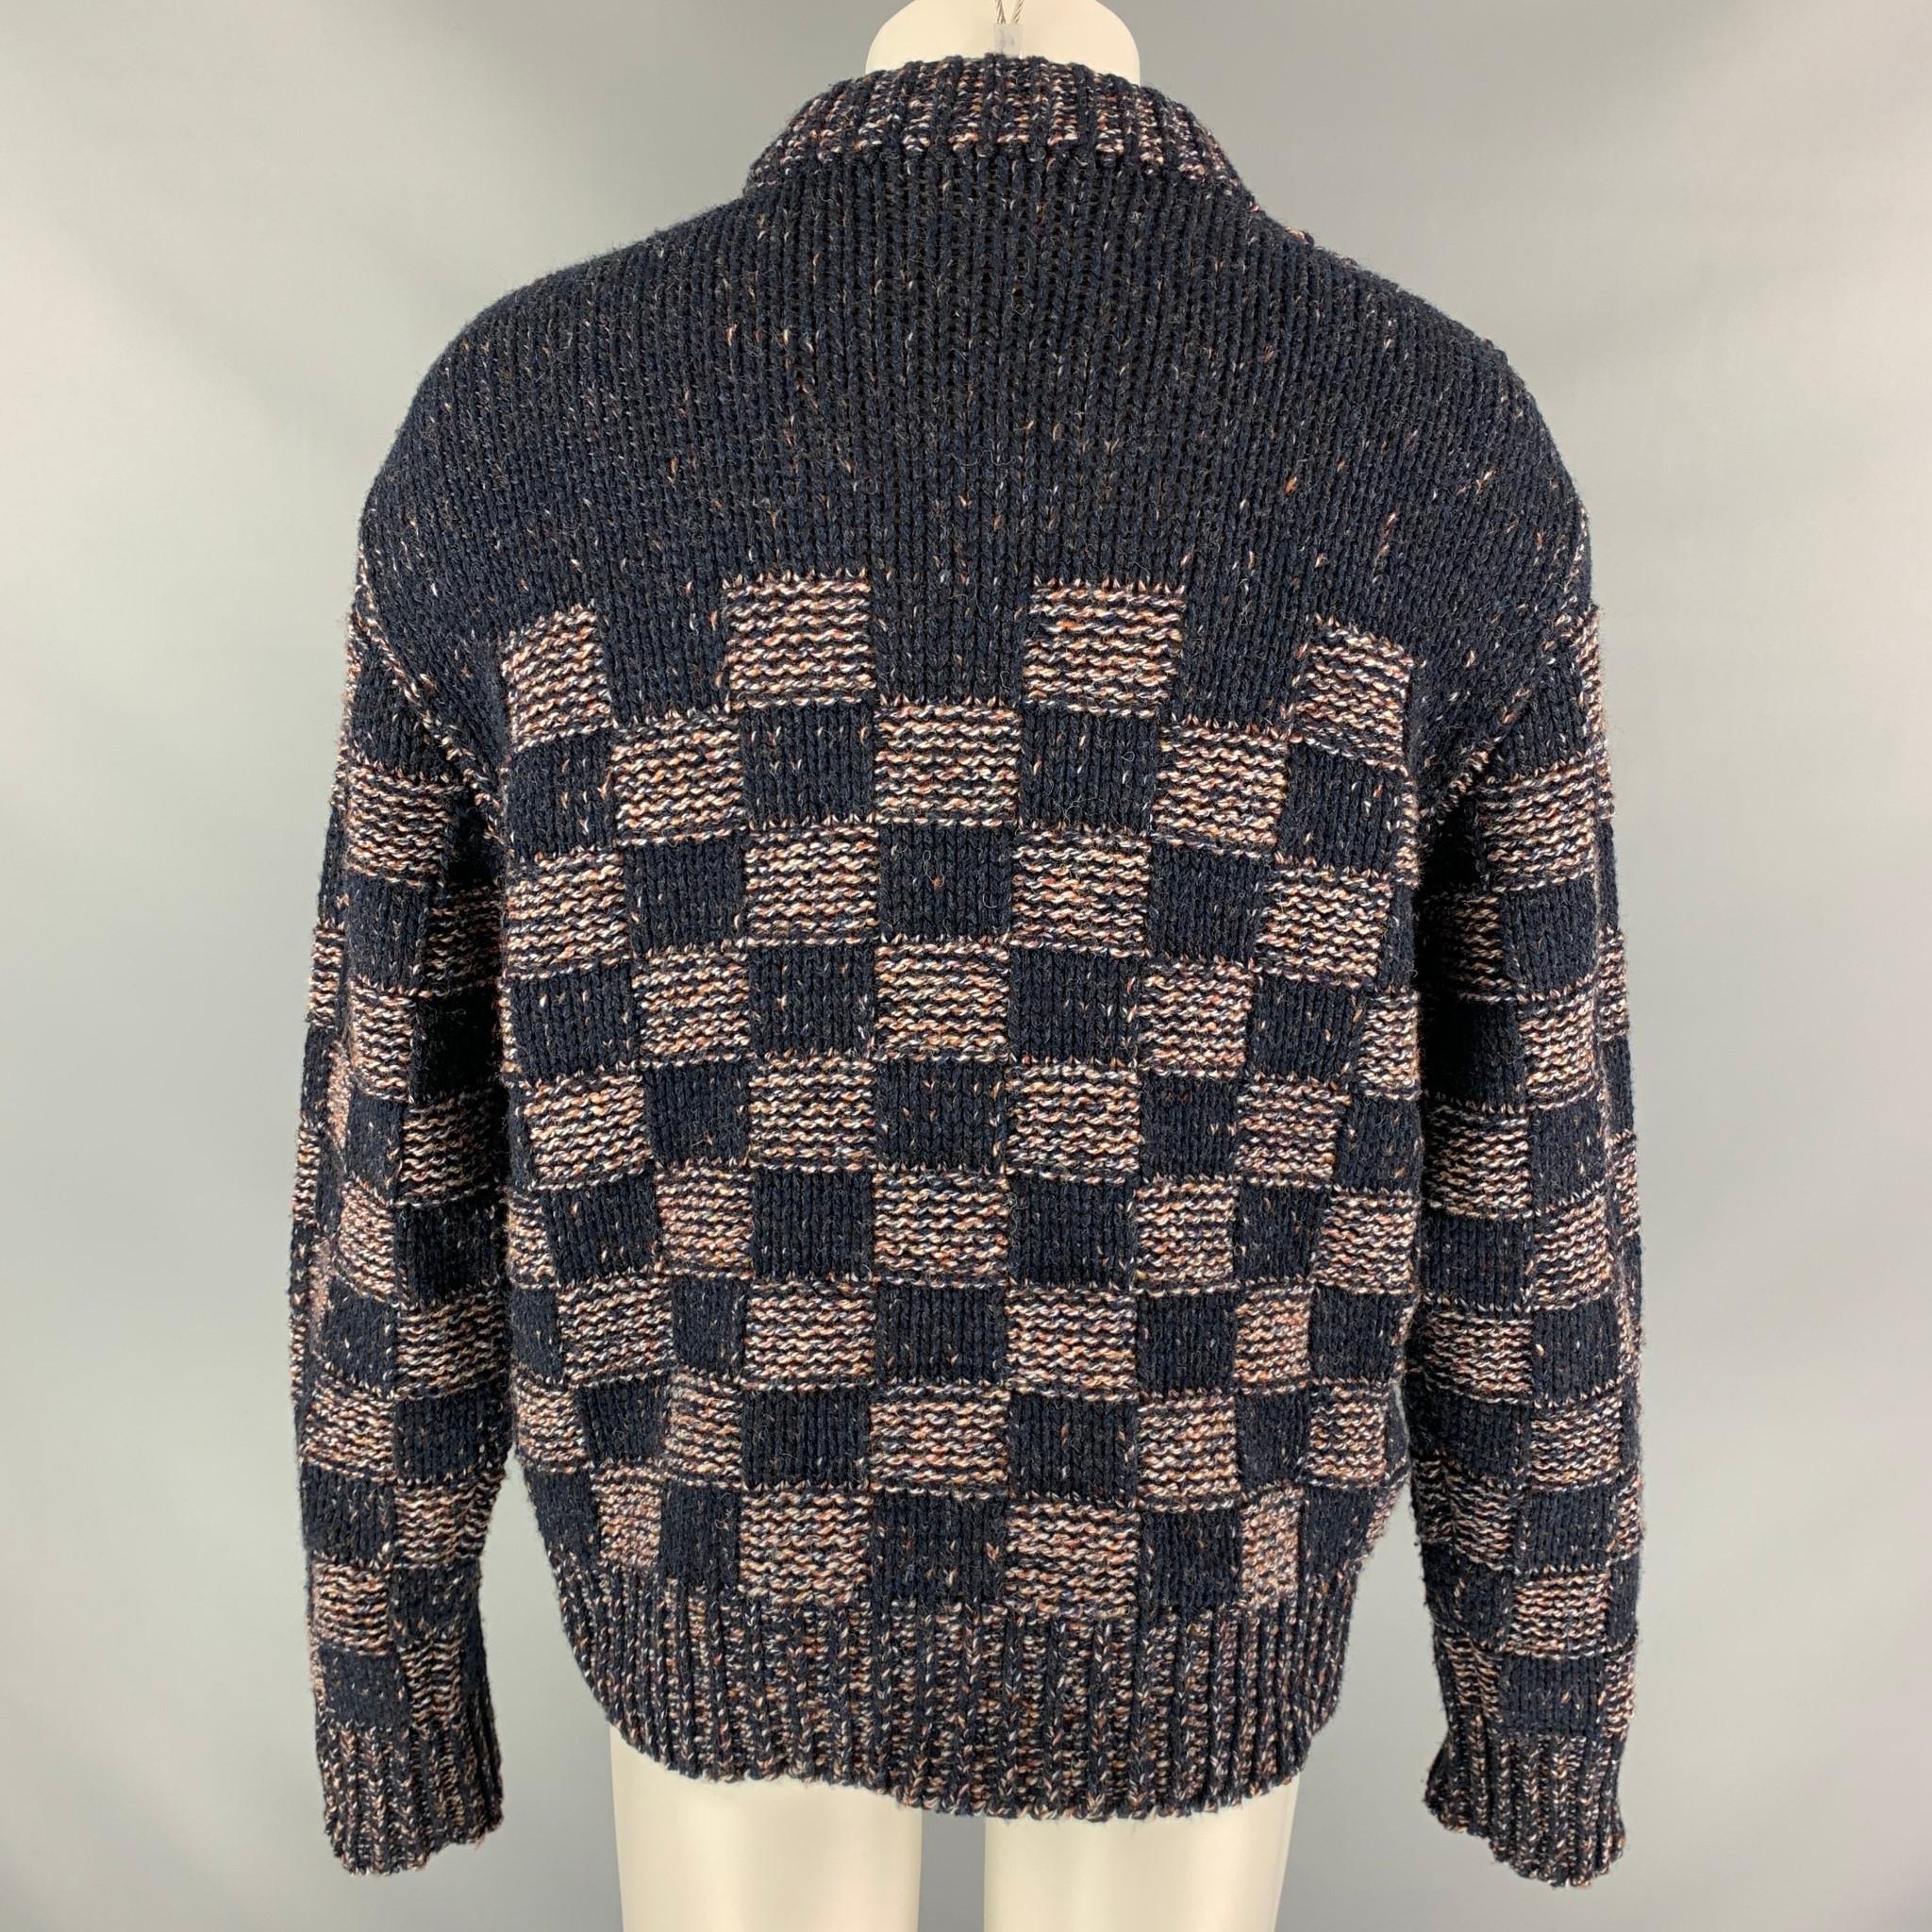 MARNI sweater comes in a navy & brick checkered print wool featuring a oversized fit and crew-neck. Made in Italy.

Very Good Pre-Owned Condition.
Marked: 46

Measurements:

Shoulder: 22.5 in.
Chest: 46 in.
Sleeve: 27.5 in.
Length: 26.5 in. 

SKU: